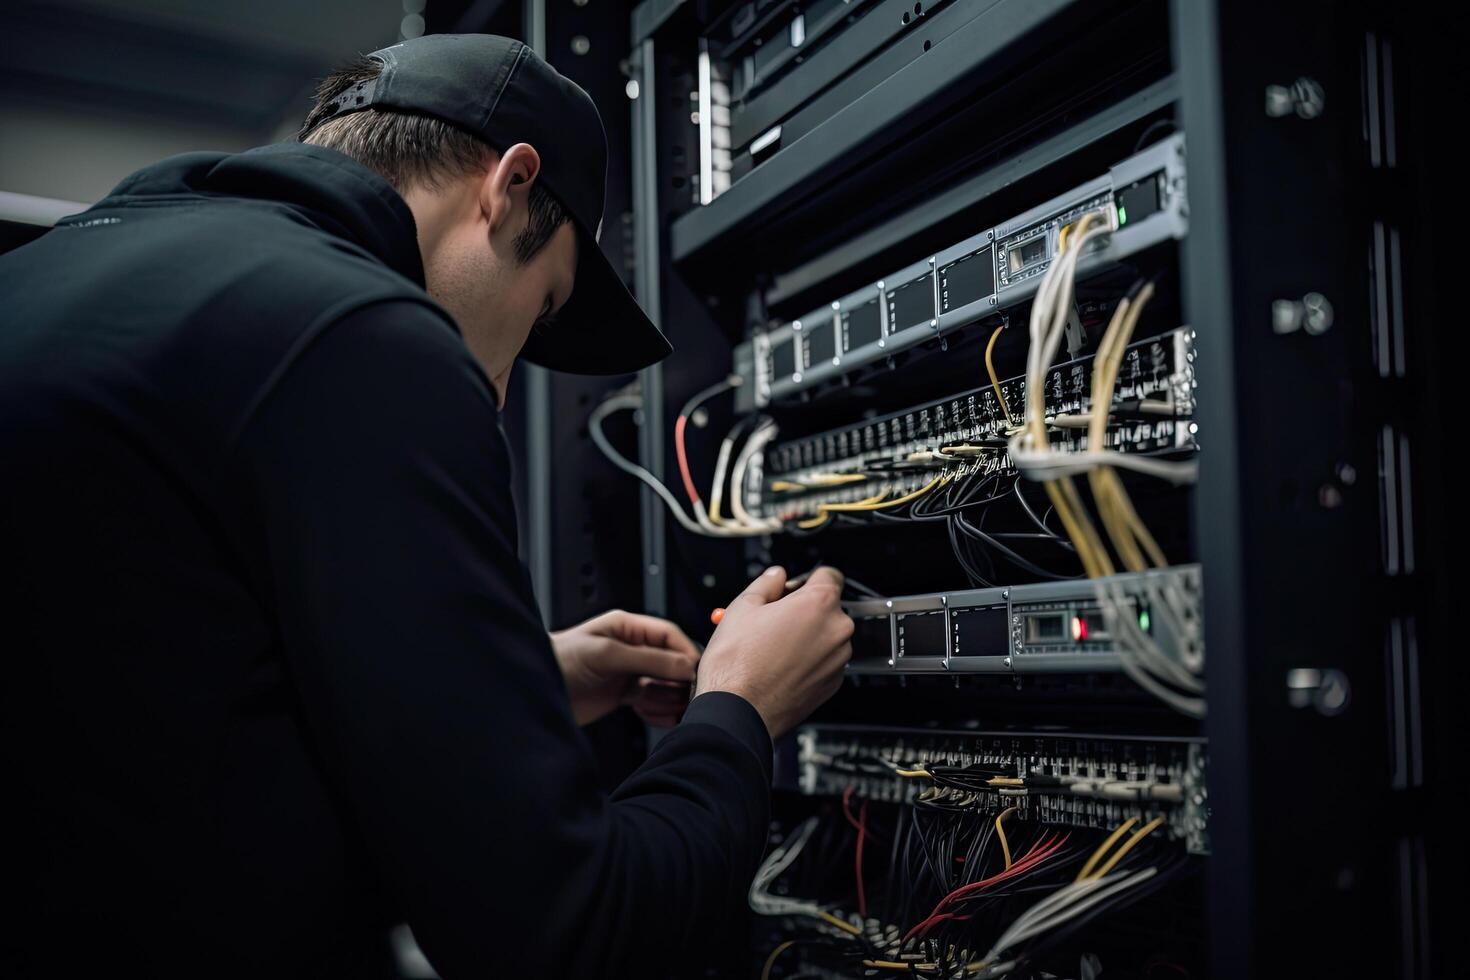 Technician repairing server in data center. Technology and internet concept. An IT Engineer close up shot of fixing server problem, photo